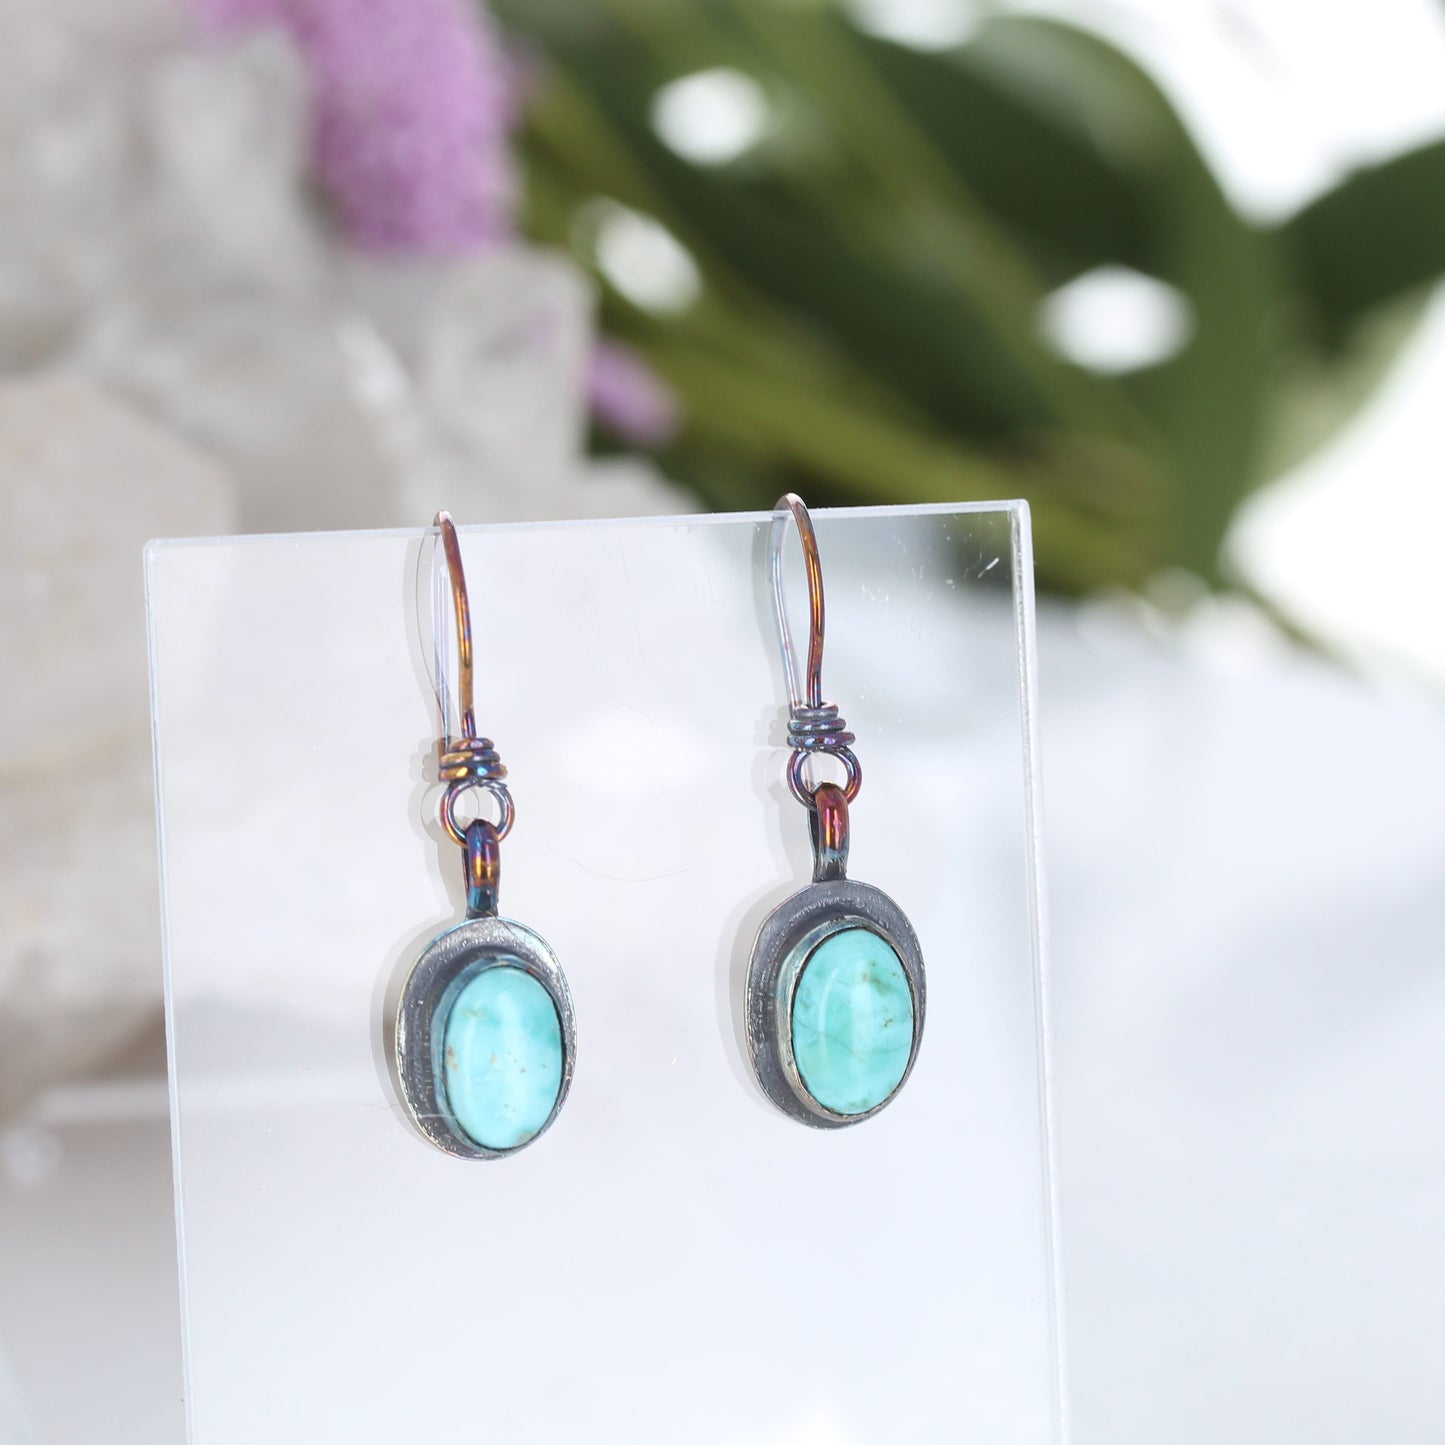 Blue Sonoran Turquoise Earrings Sterling Rainbow Oxidized